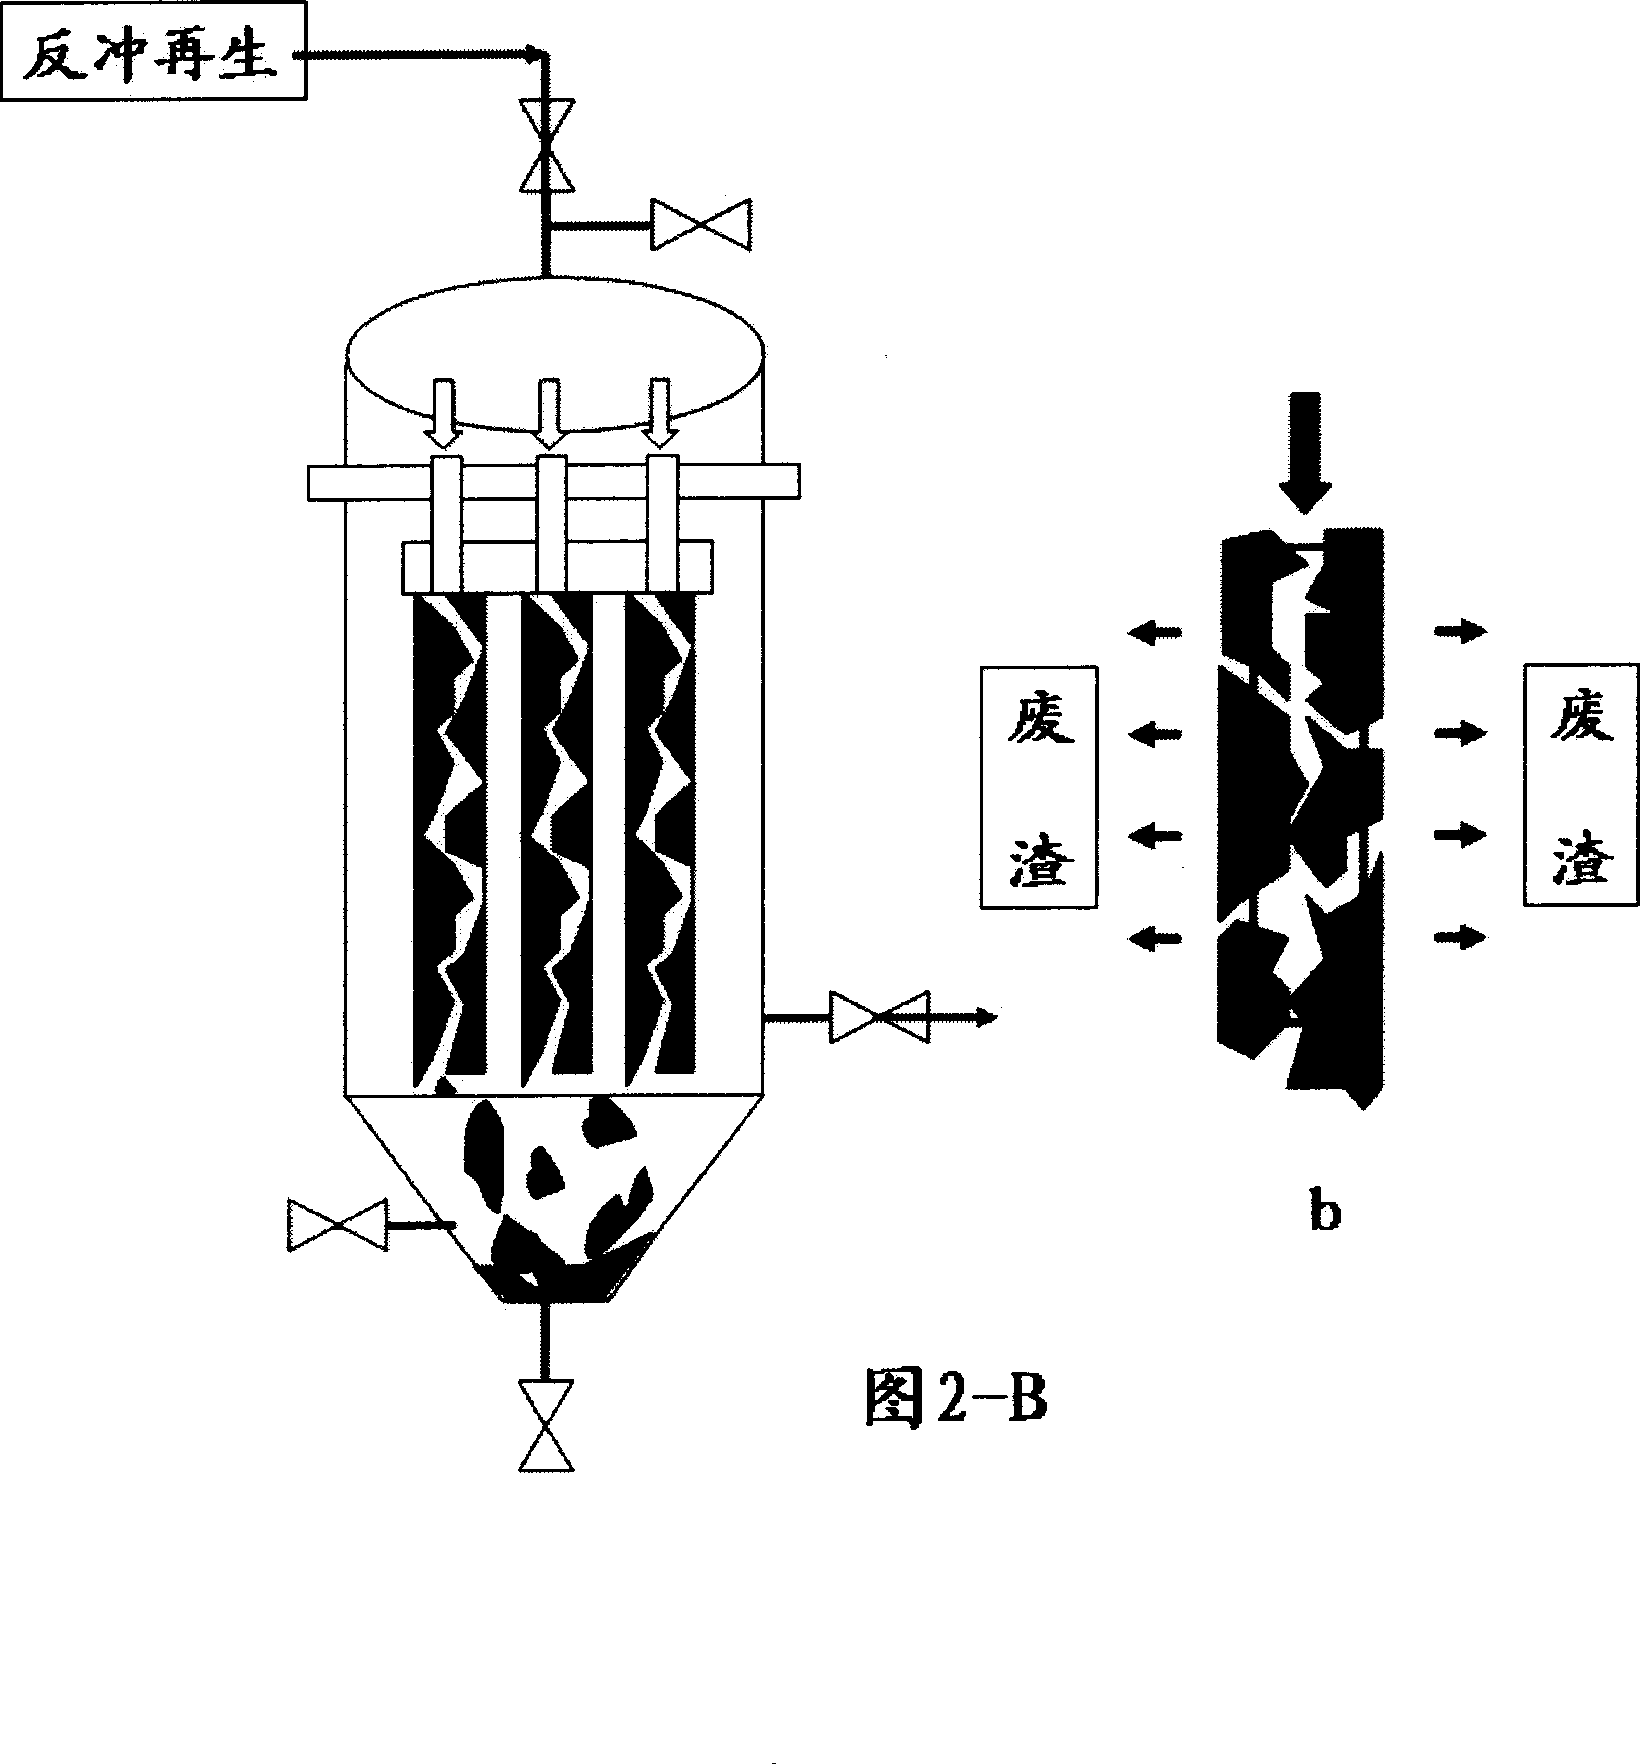 Mortar recovery technique for cutting single-crystal and polycrystalline silicon wire